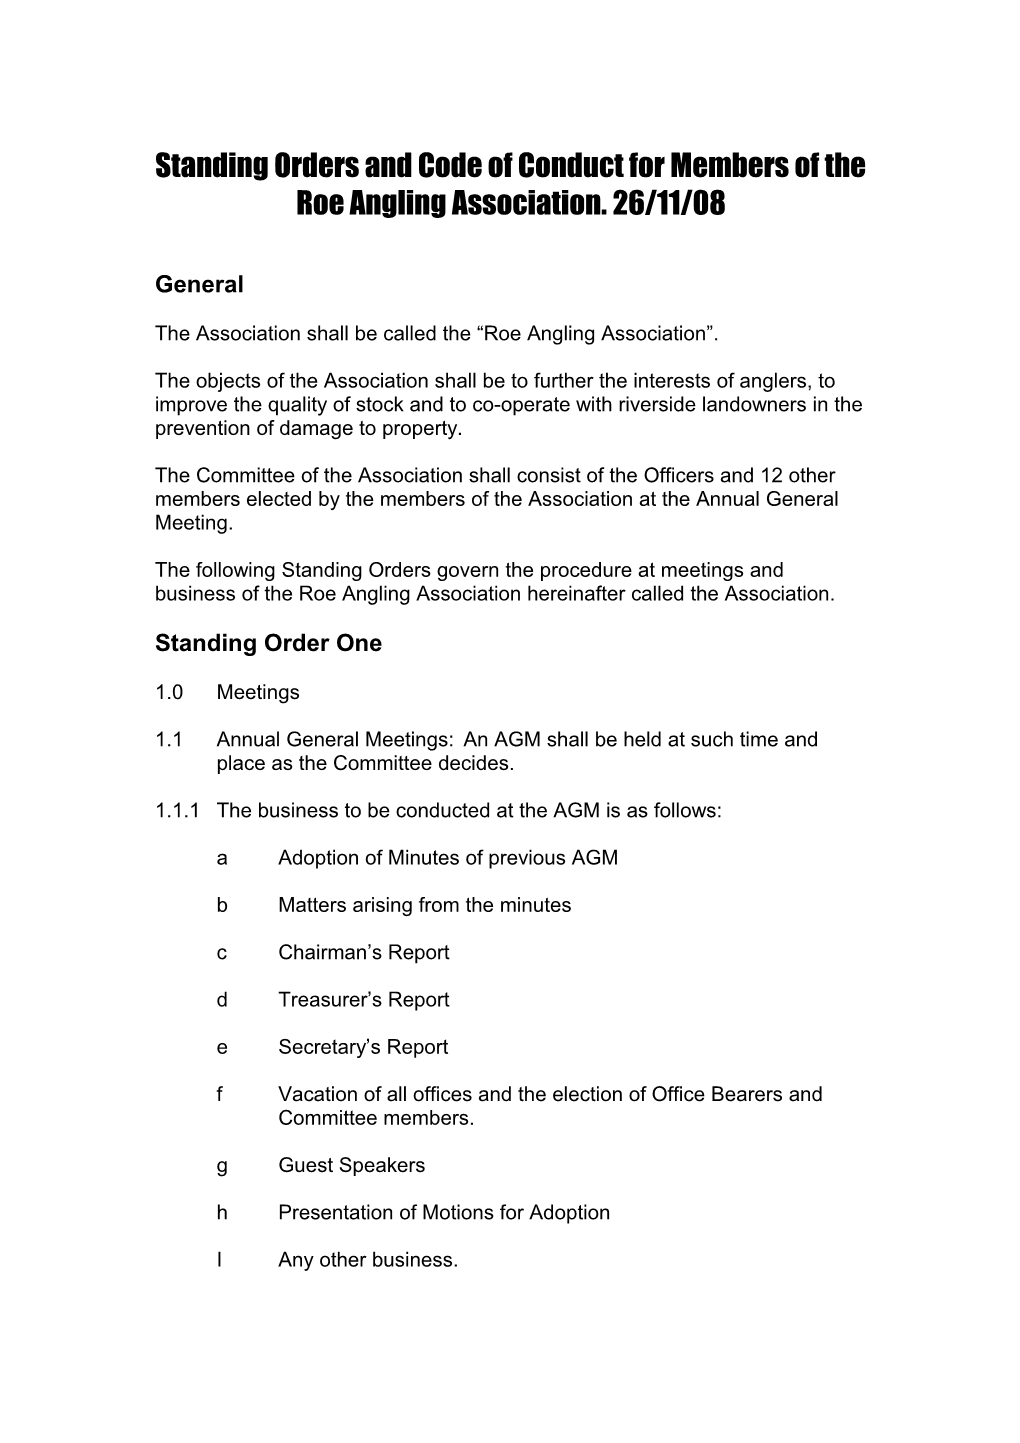 Standing Orders and Code of Conduct for Members of the Roe Angling Association